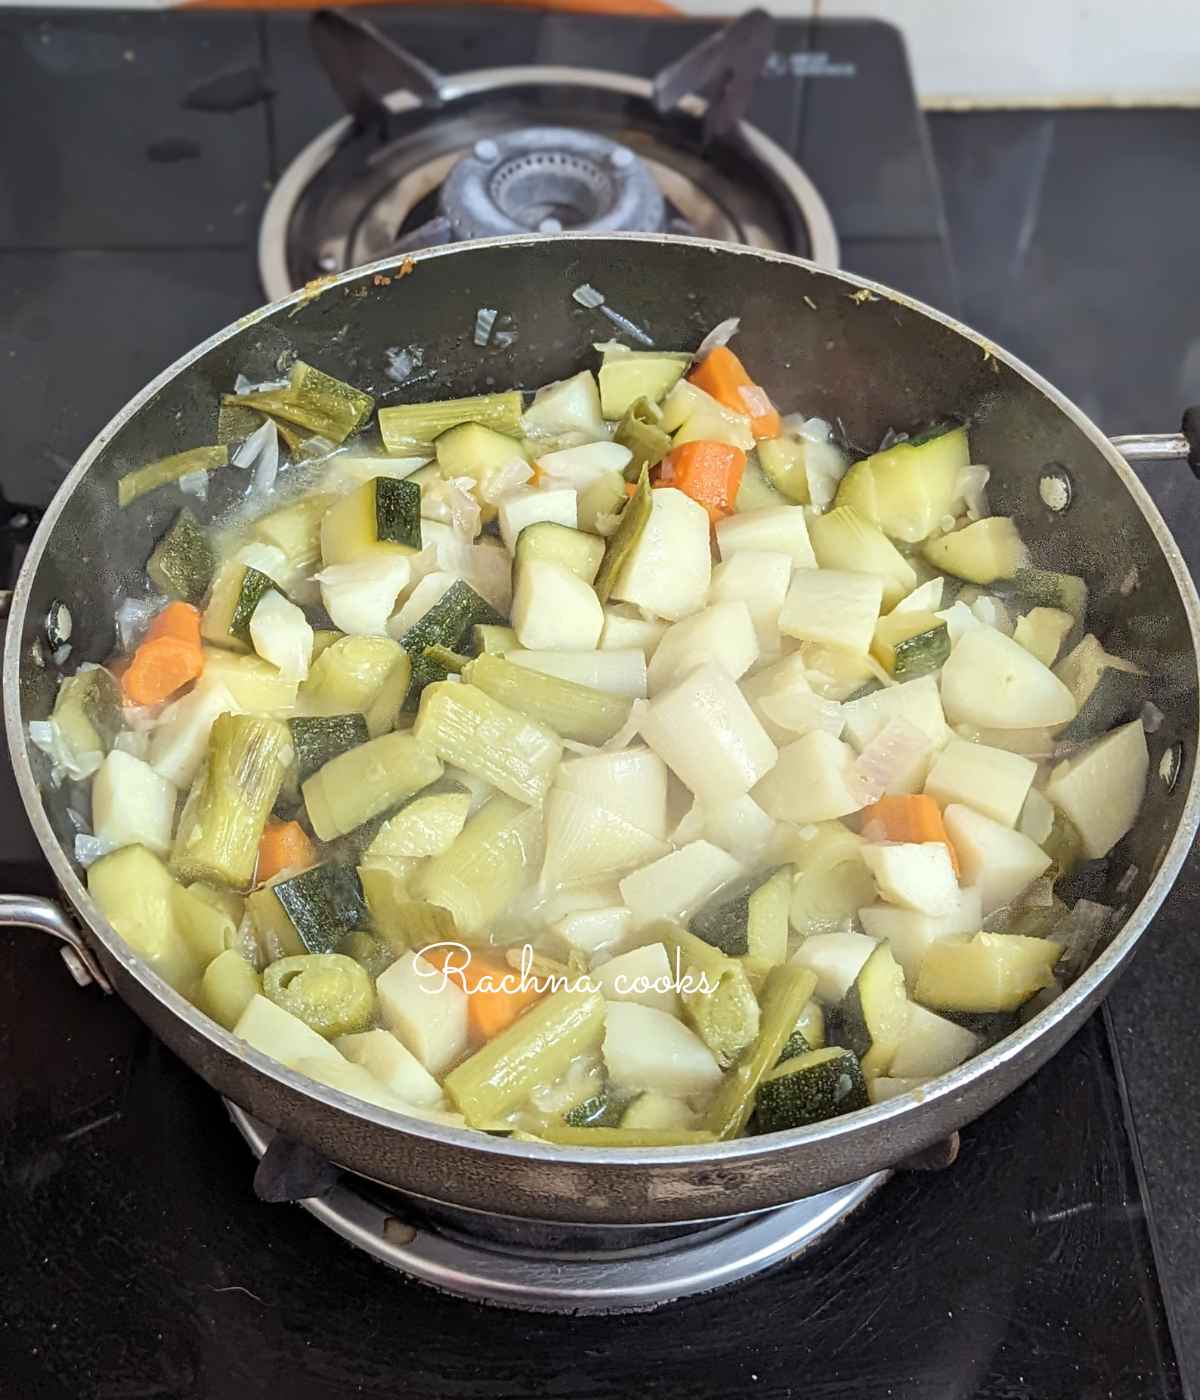 Vegetables being cooked in a pan.